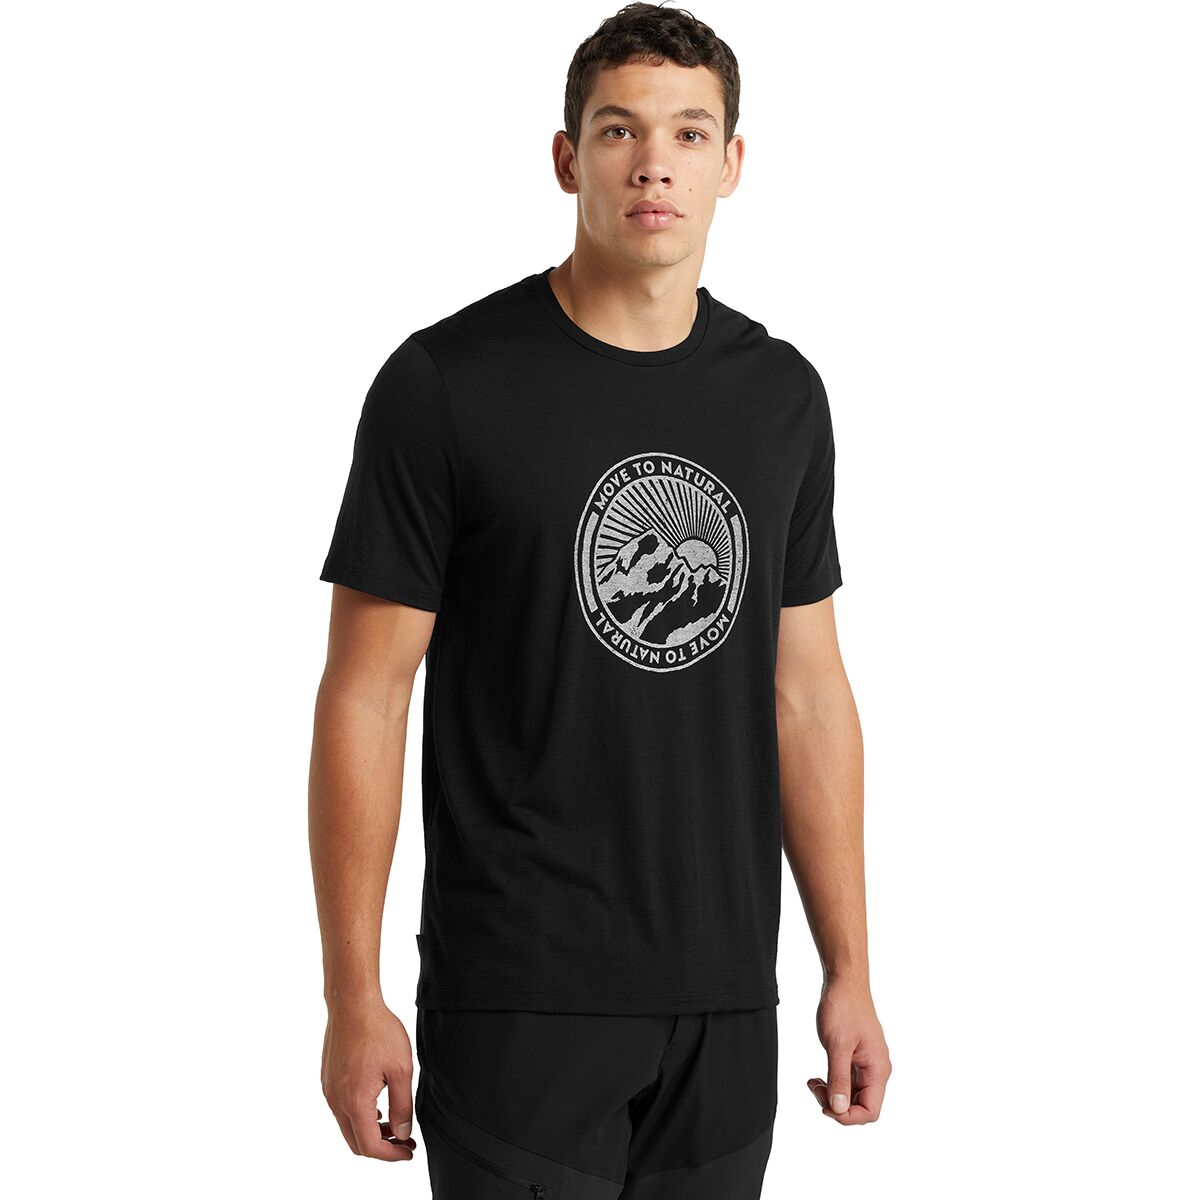 Icebreaker Tech Lite II Move to Natural Mountain SS T-Shirt - Men's product image